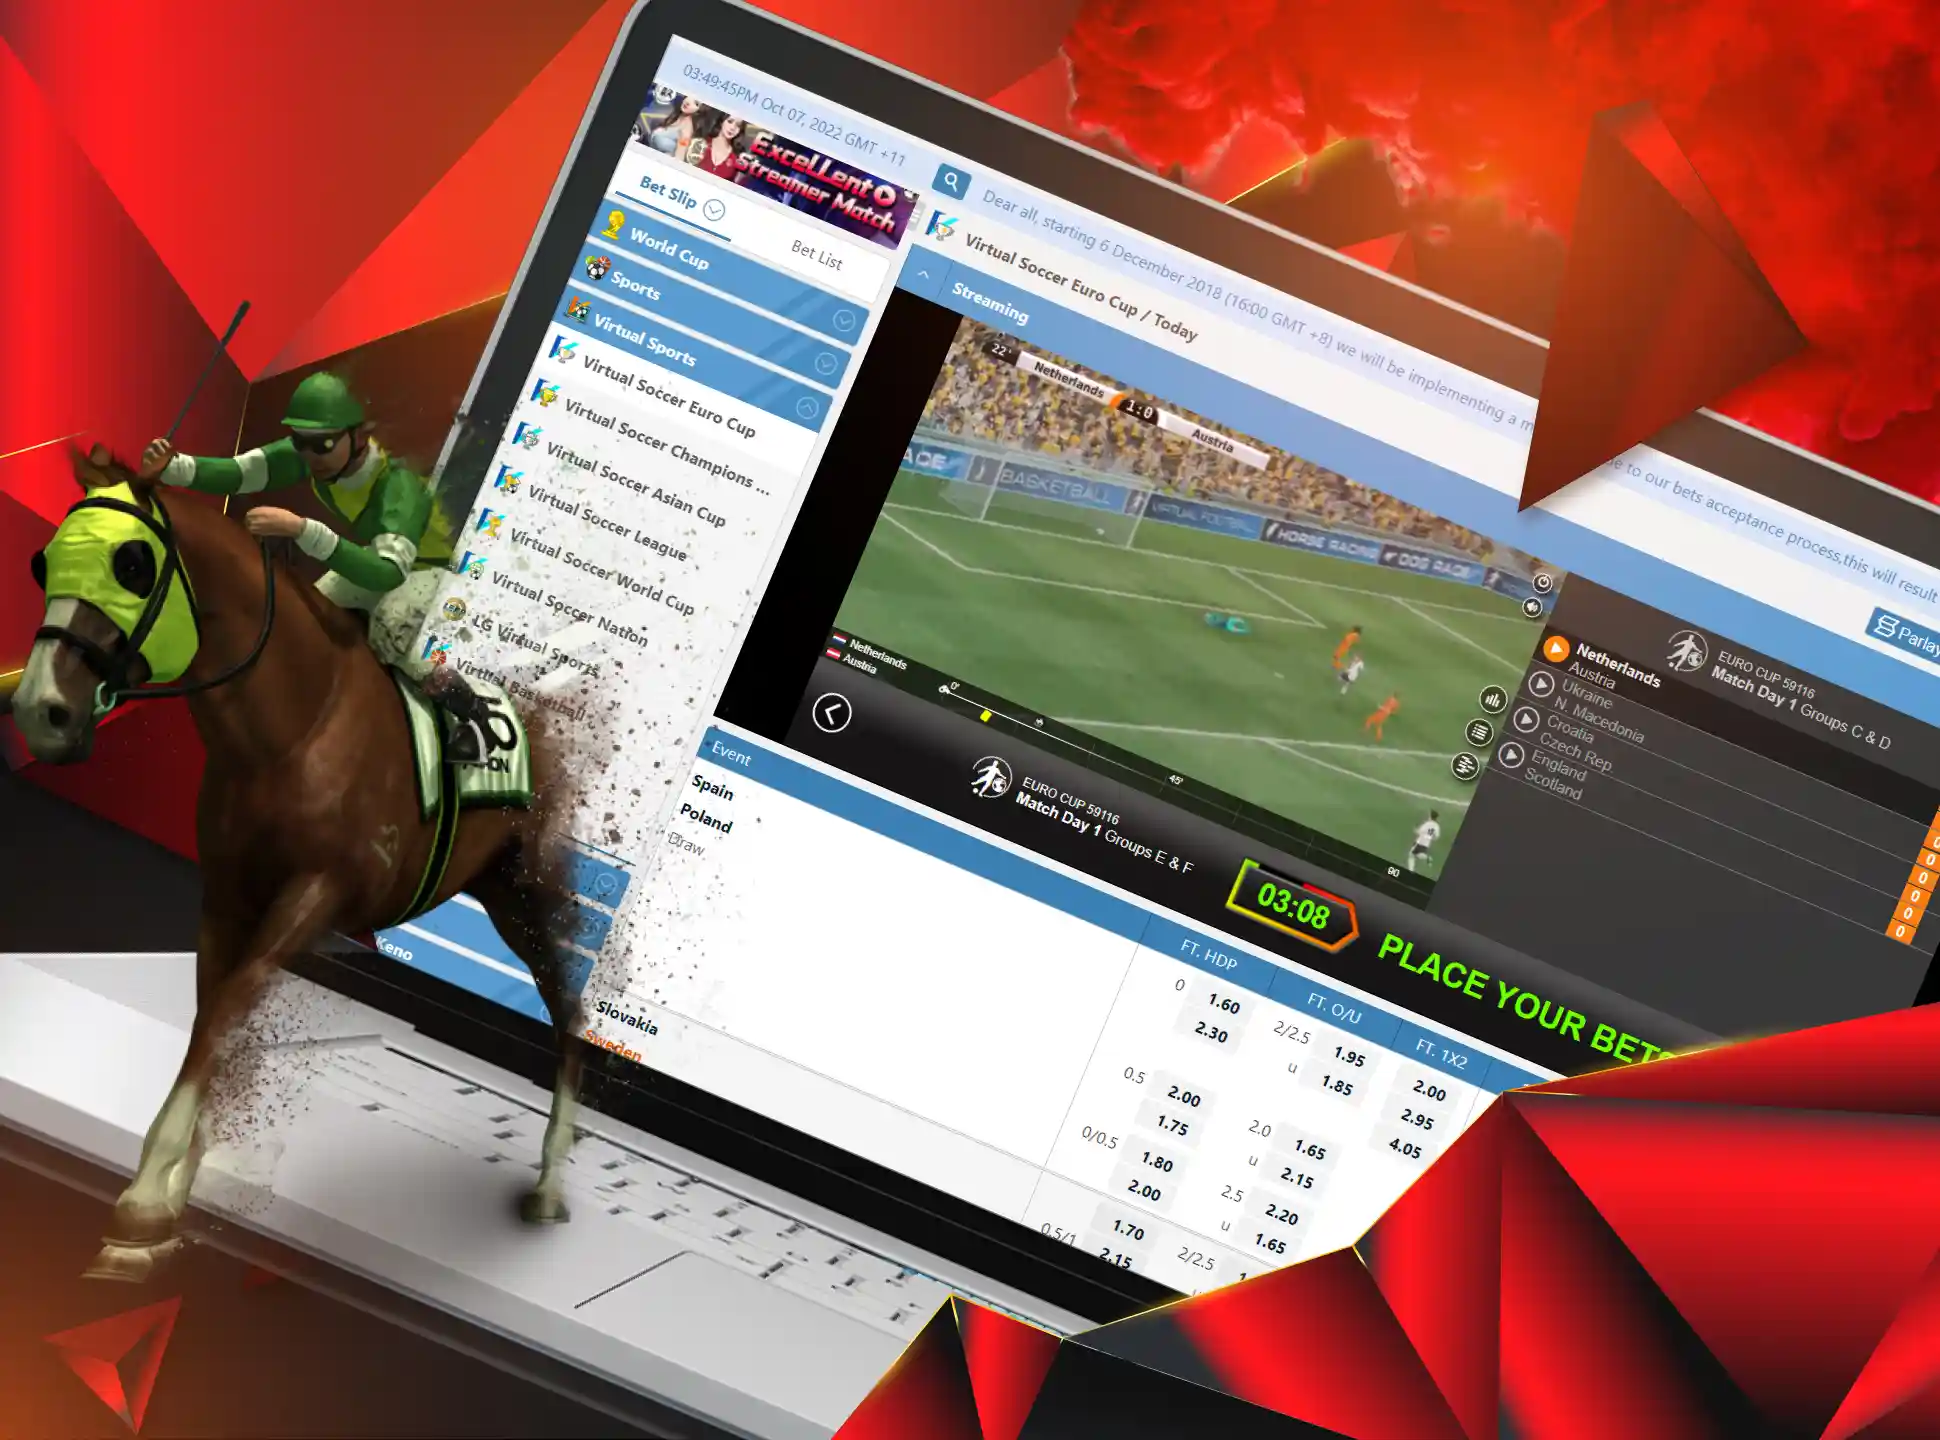 You can also place bets on the virtual sports as well as on the real sports.